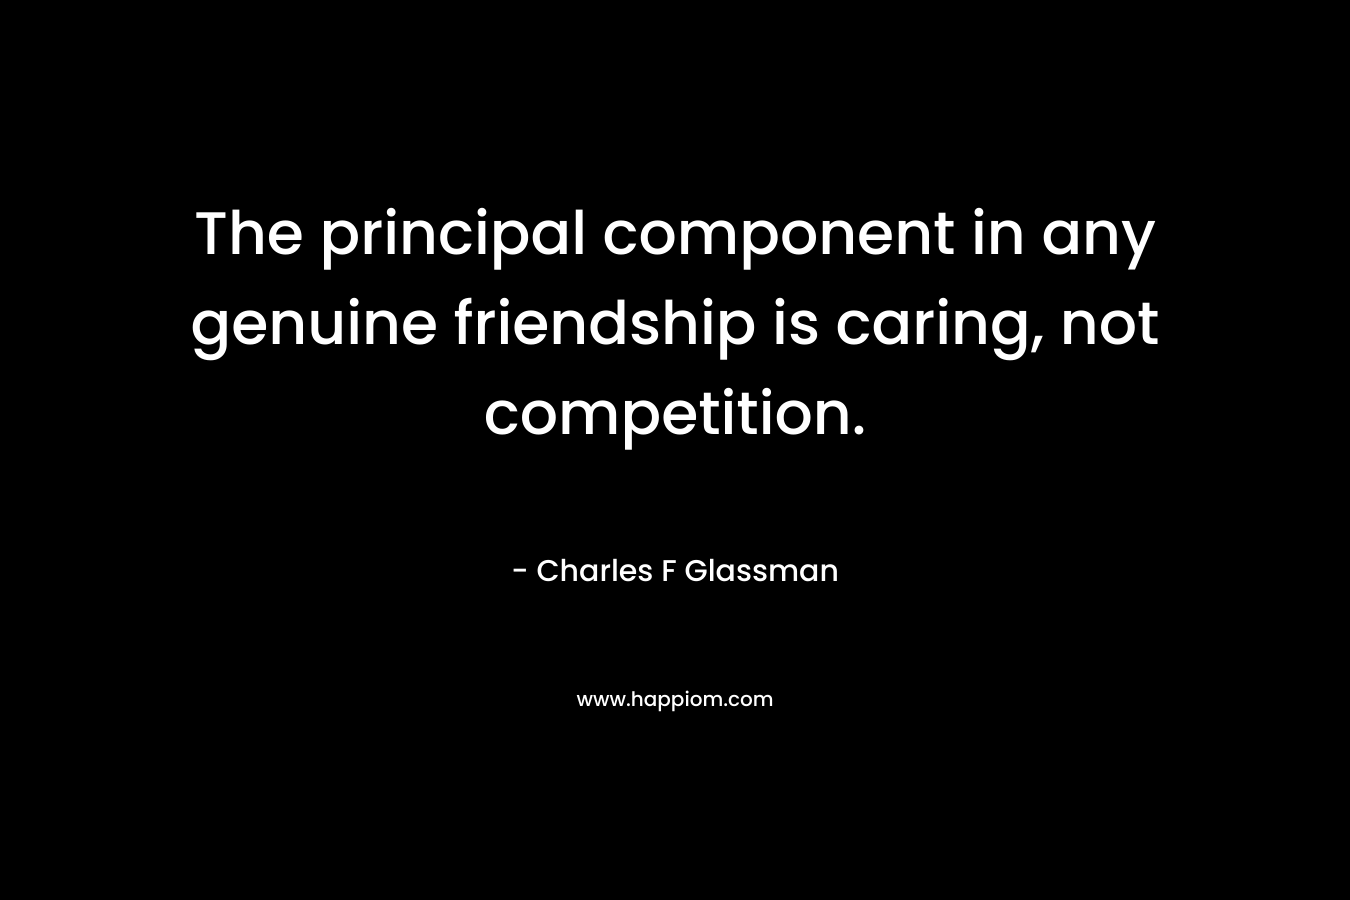 The principal component in any genuine friendship is caring, not competition.